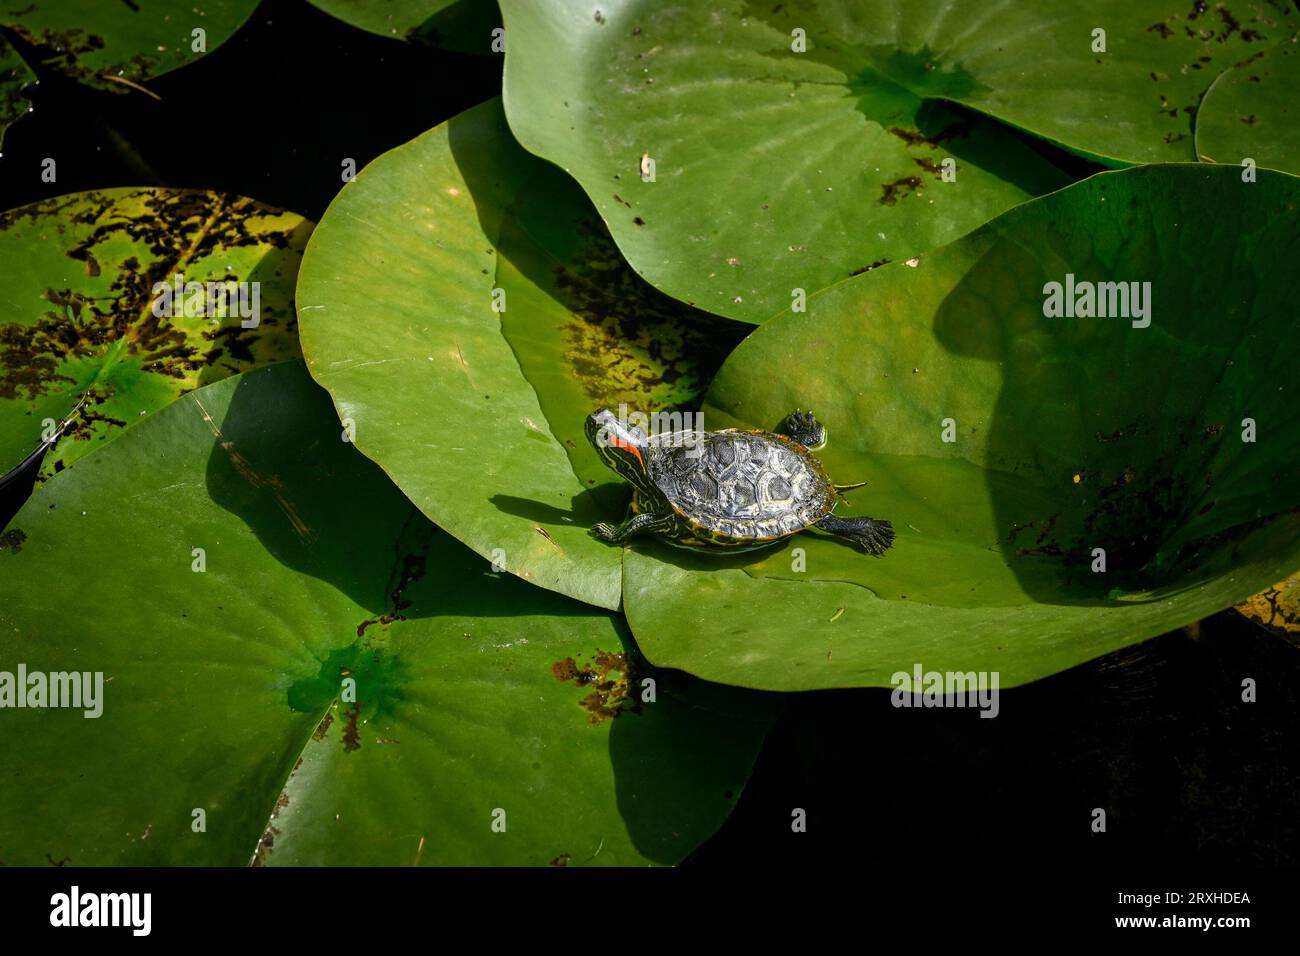 Red-eared slider, red-eared terrapin, Trachemys scripta elegans on lily pad. Stock Photo